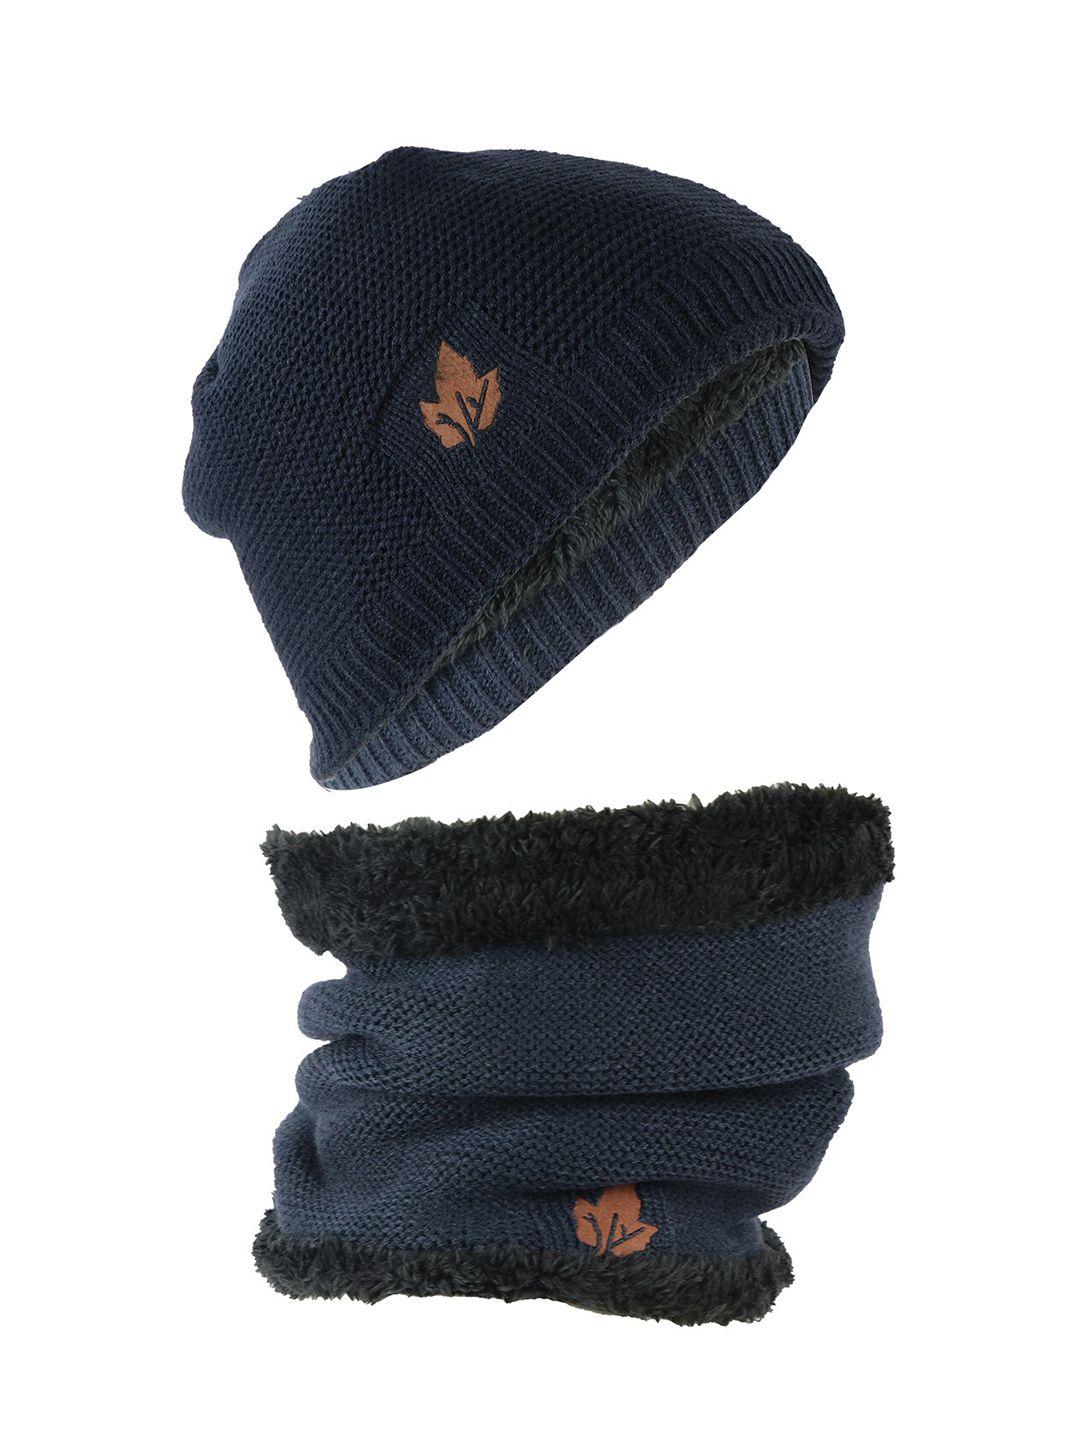 isweven unisex navy blue beanie